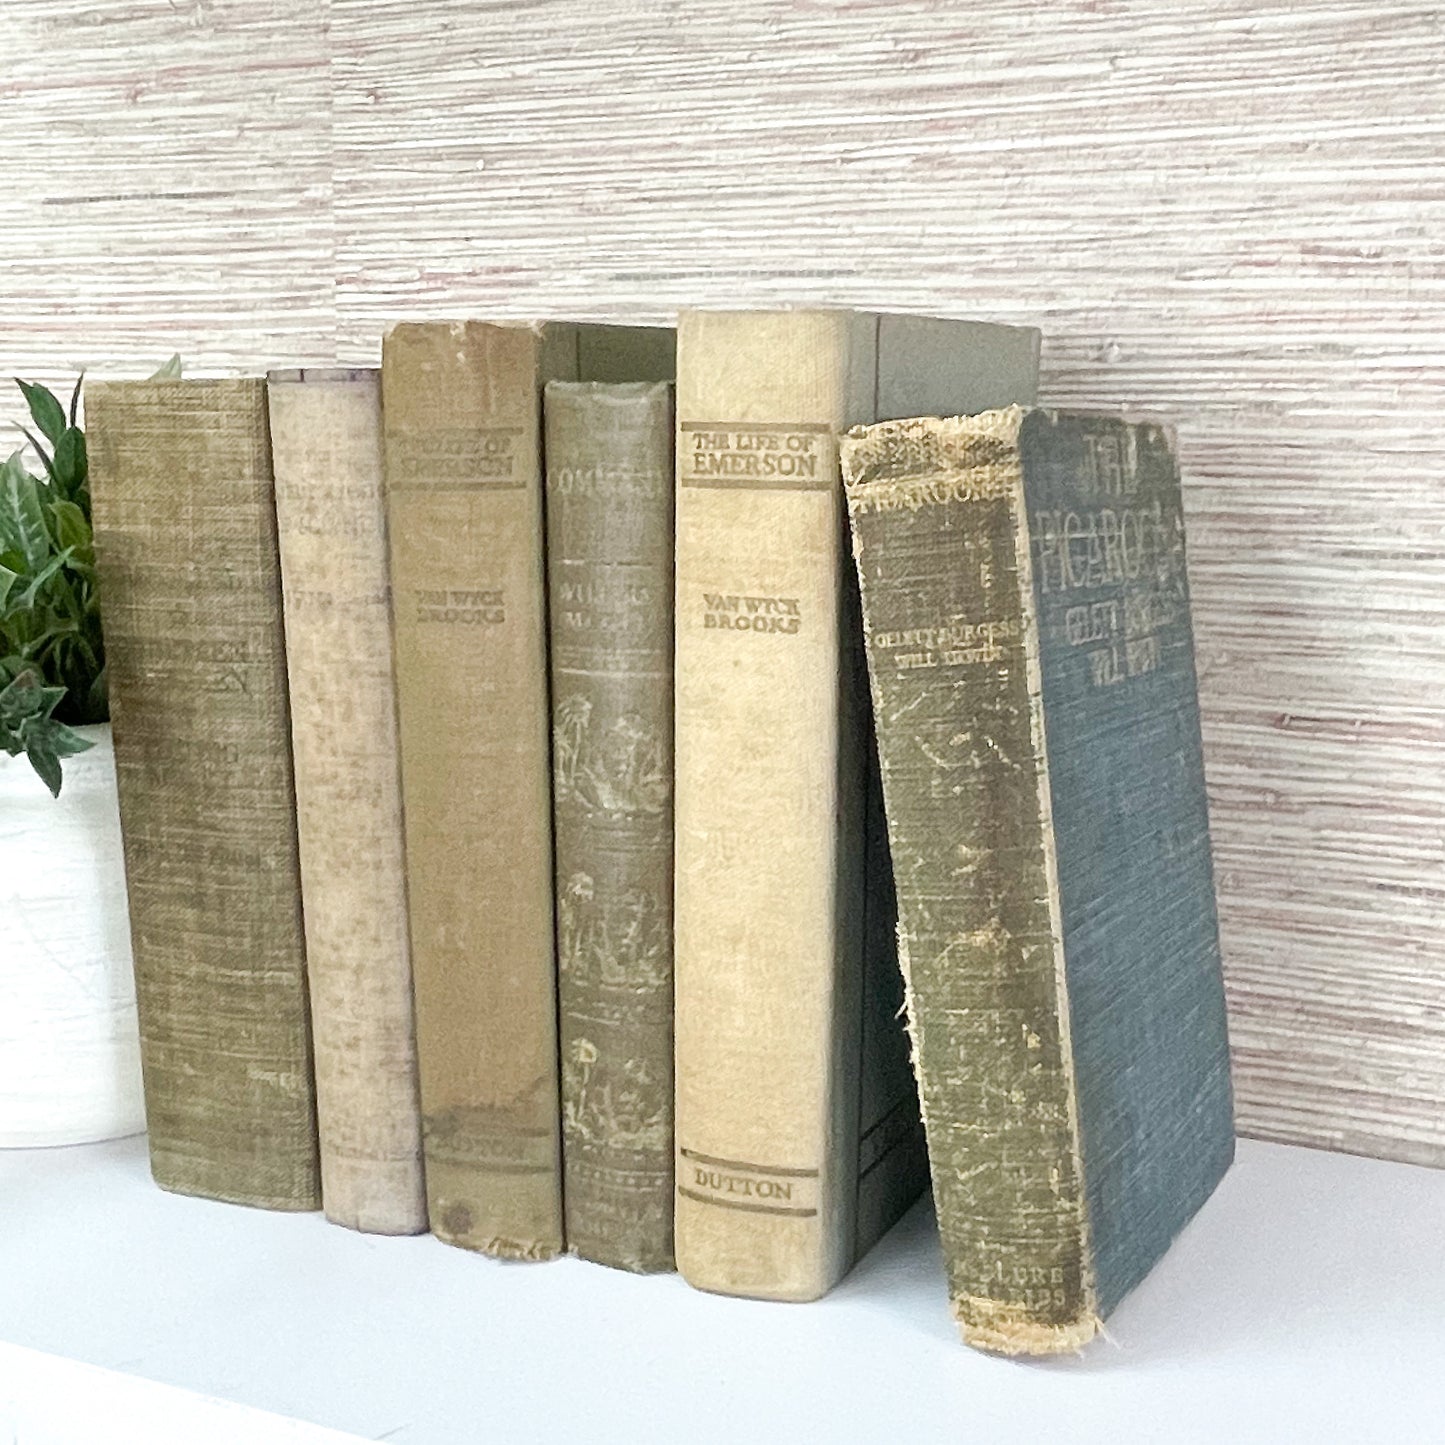 Rustic Blue Books for Shelf Accents